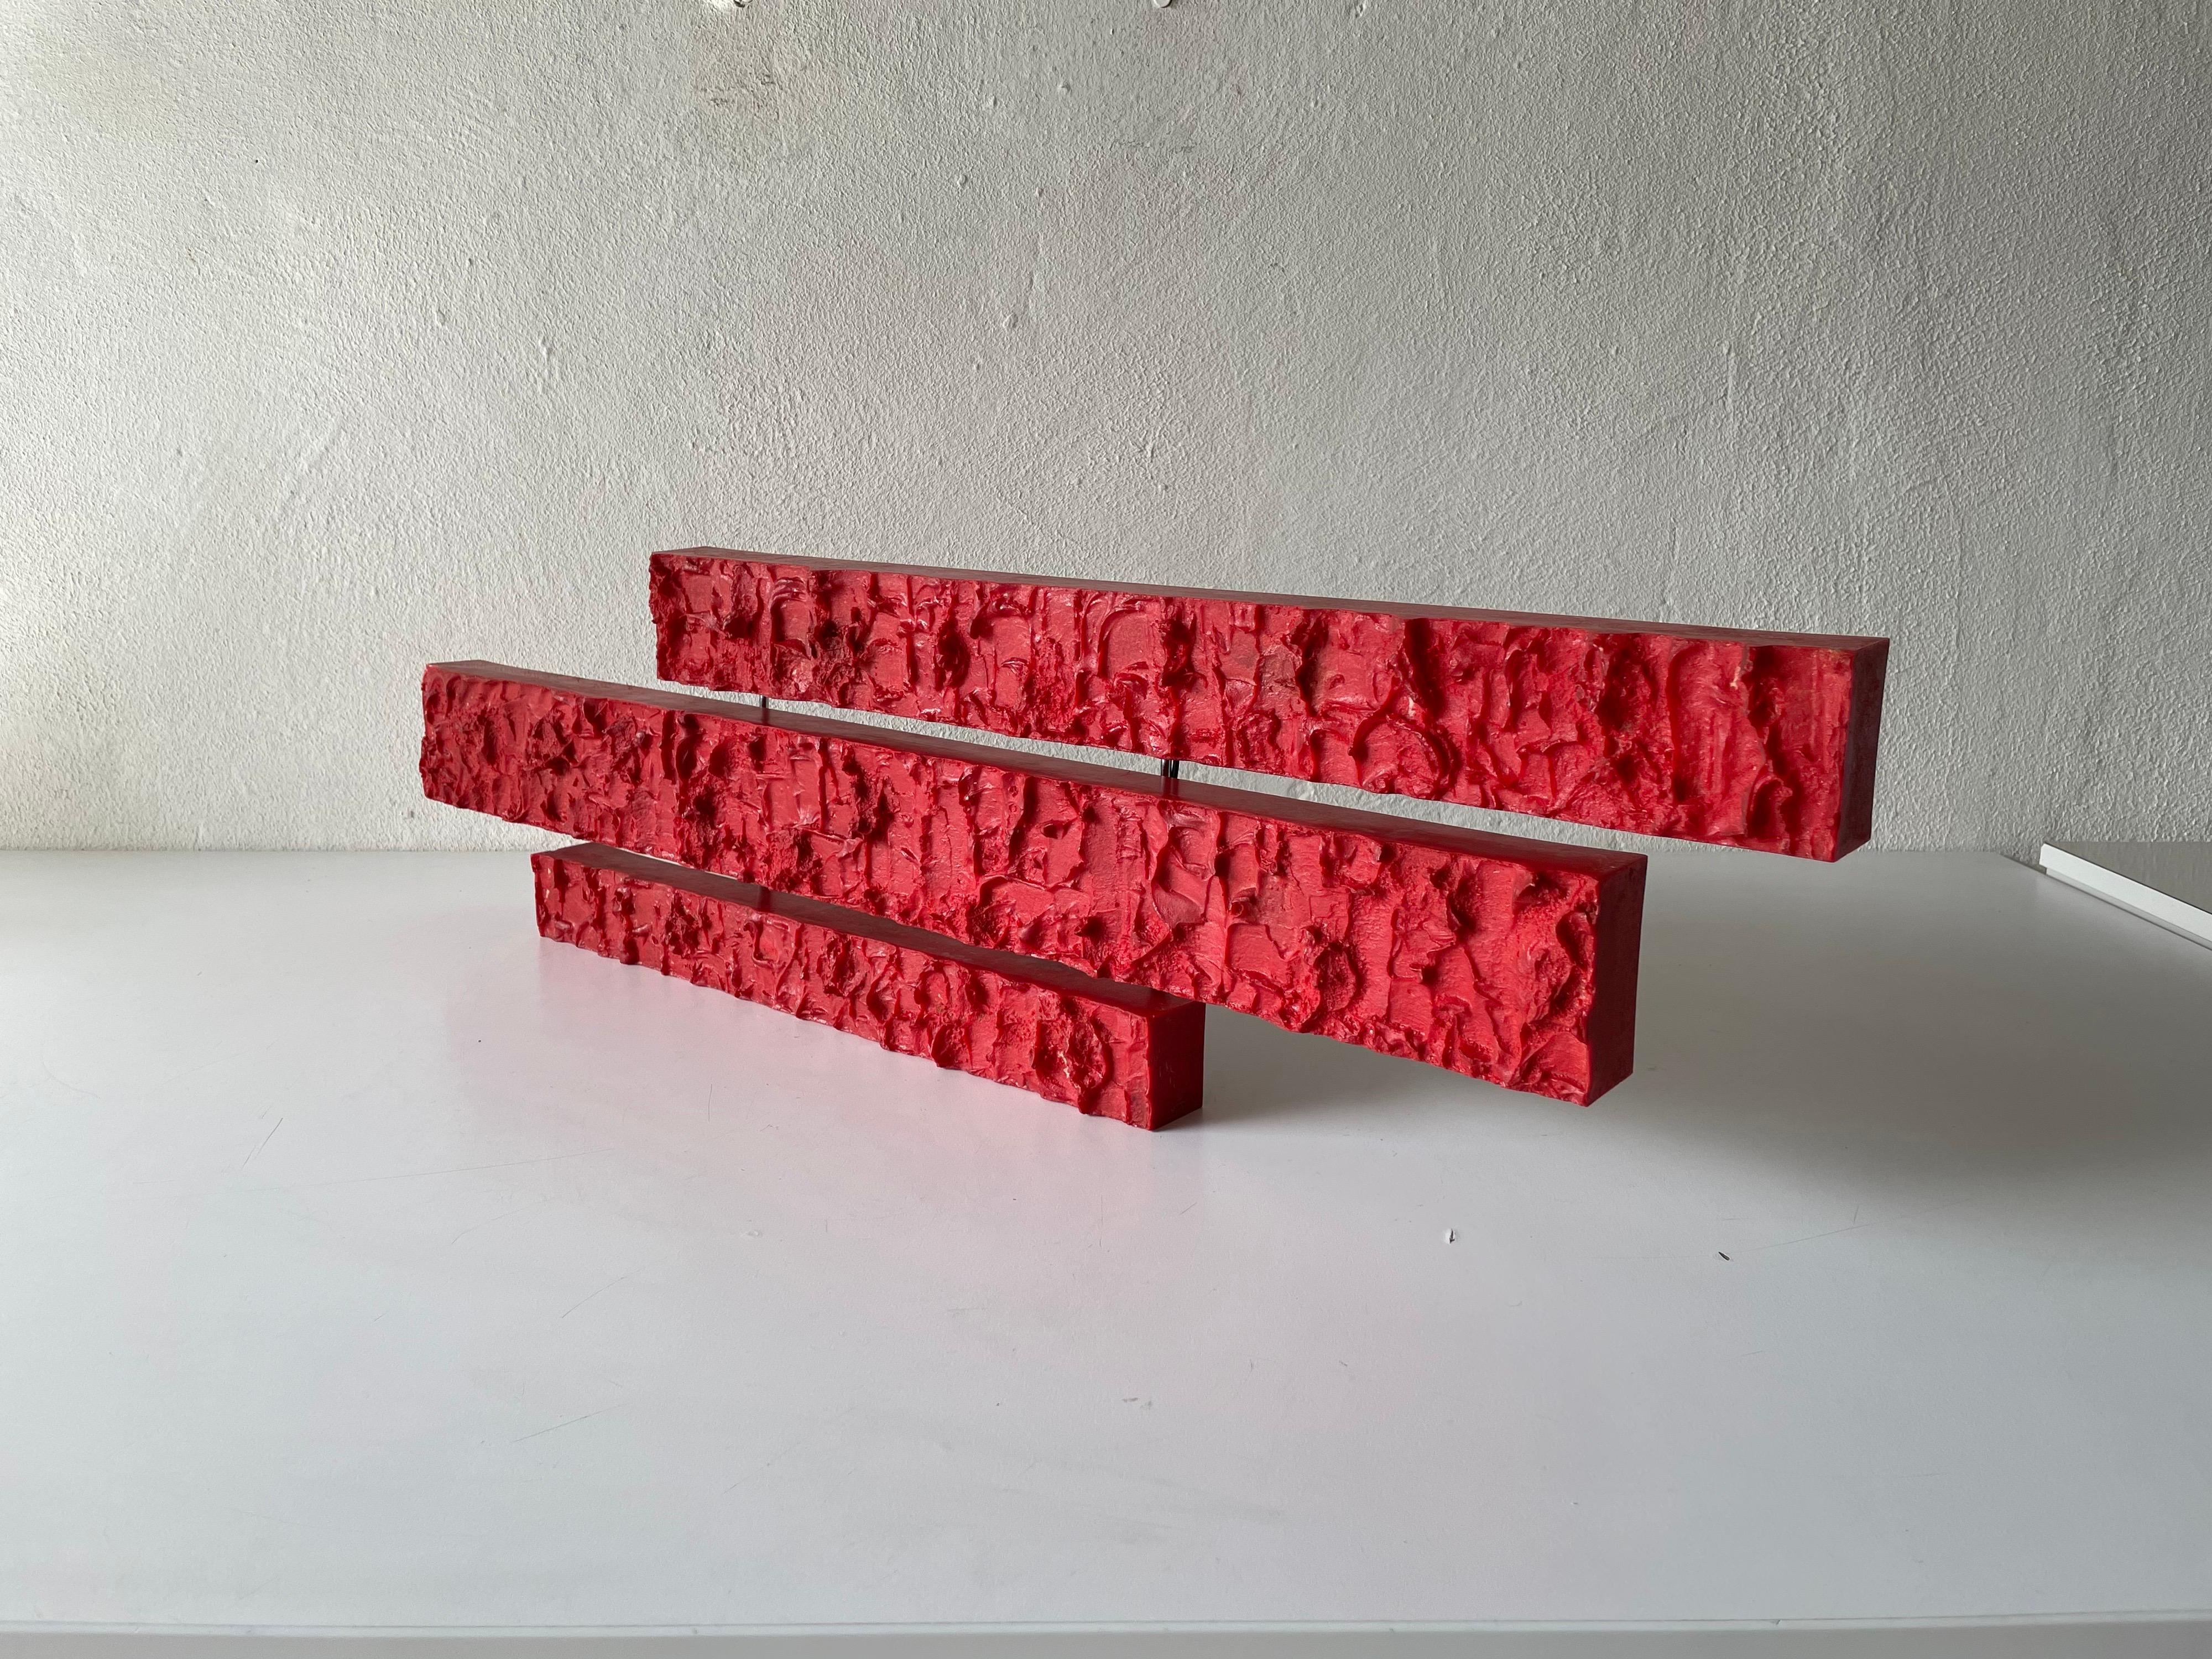 Triple shade textured red plastic large night mood lamp by Uwe Mersch Design, 1970s

Sculptural very elegant wall light

It is very ideal and suitable for all living areas.

Lamp is in good condition. No damage, no crack.
Wear consistent with